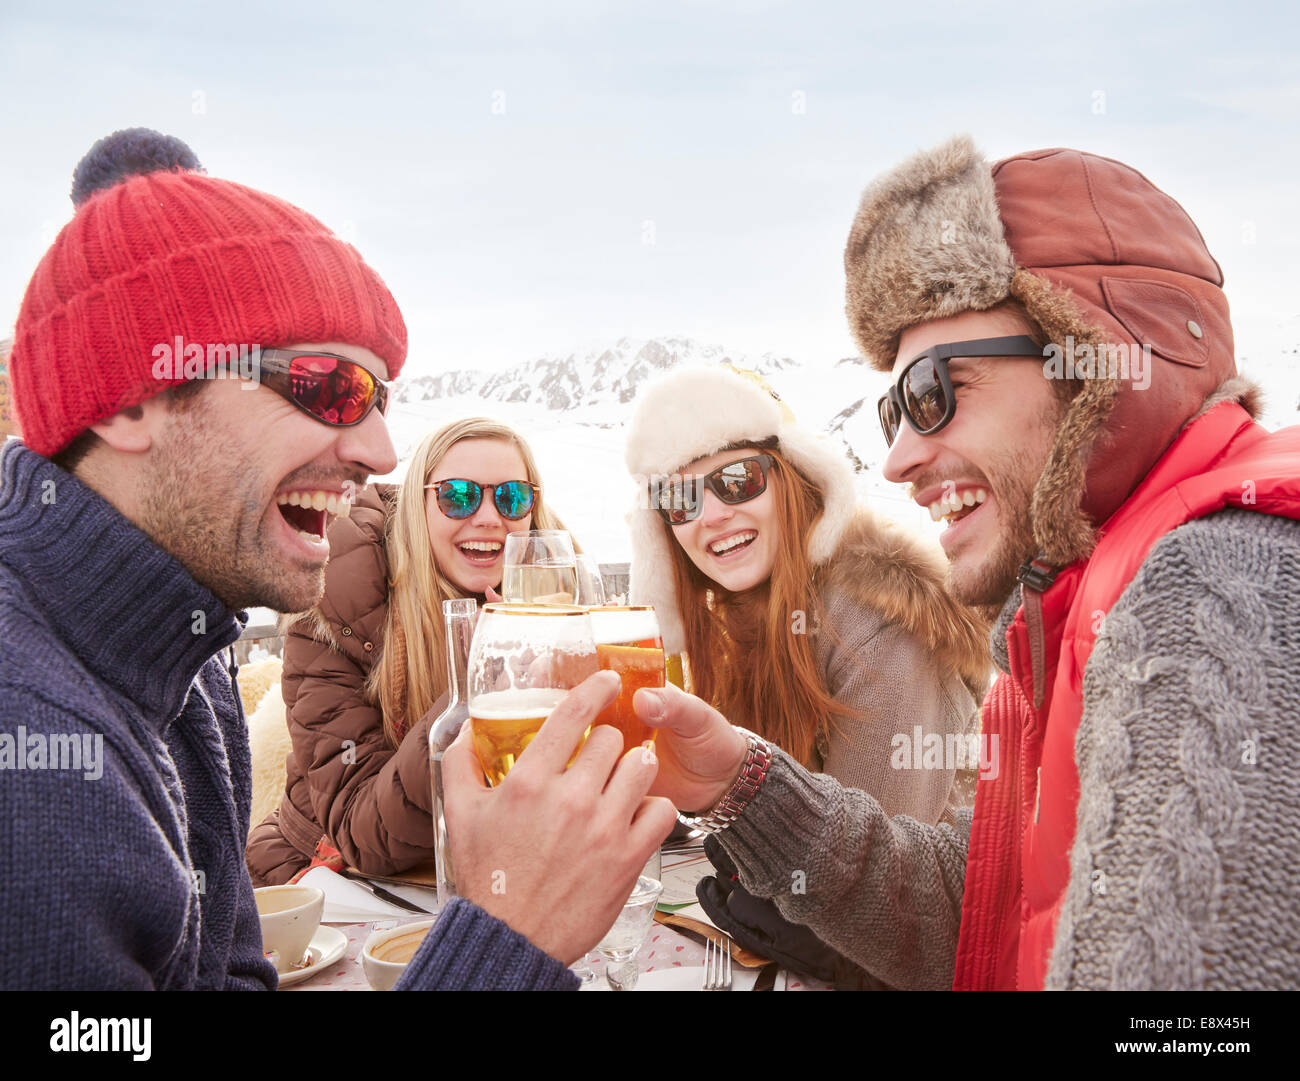 Friends celebrating with drinks in the snow Stock Photo